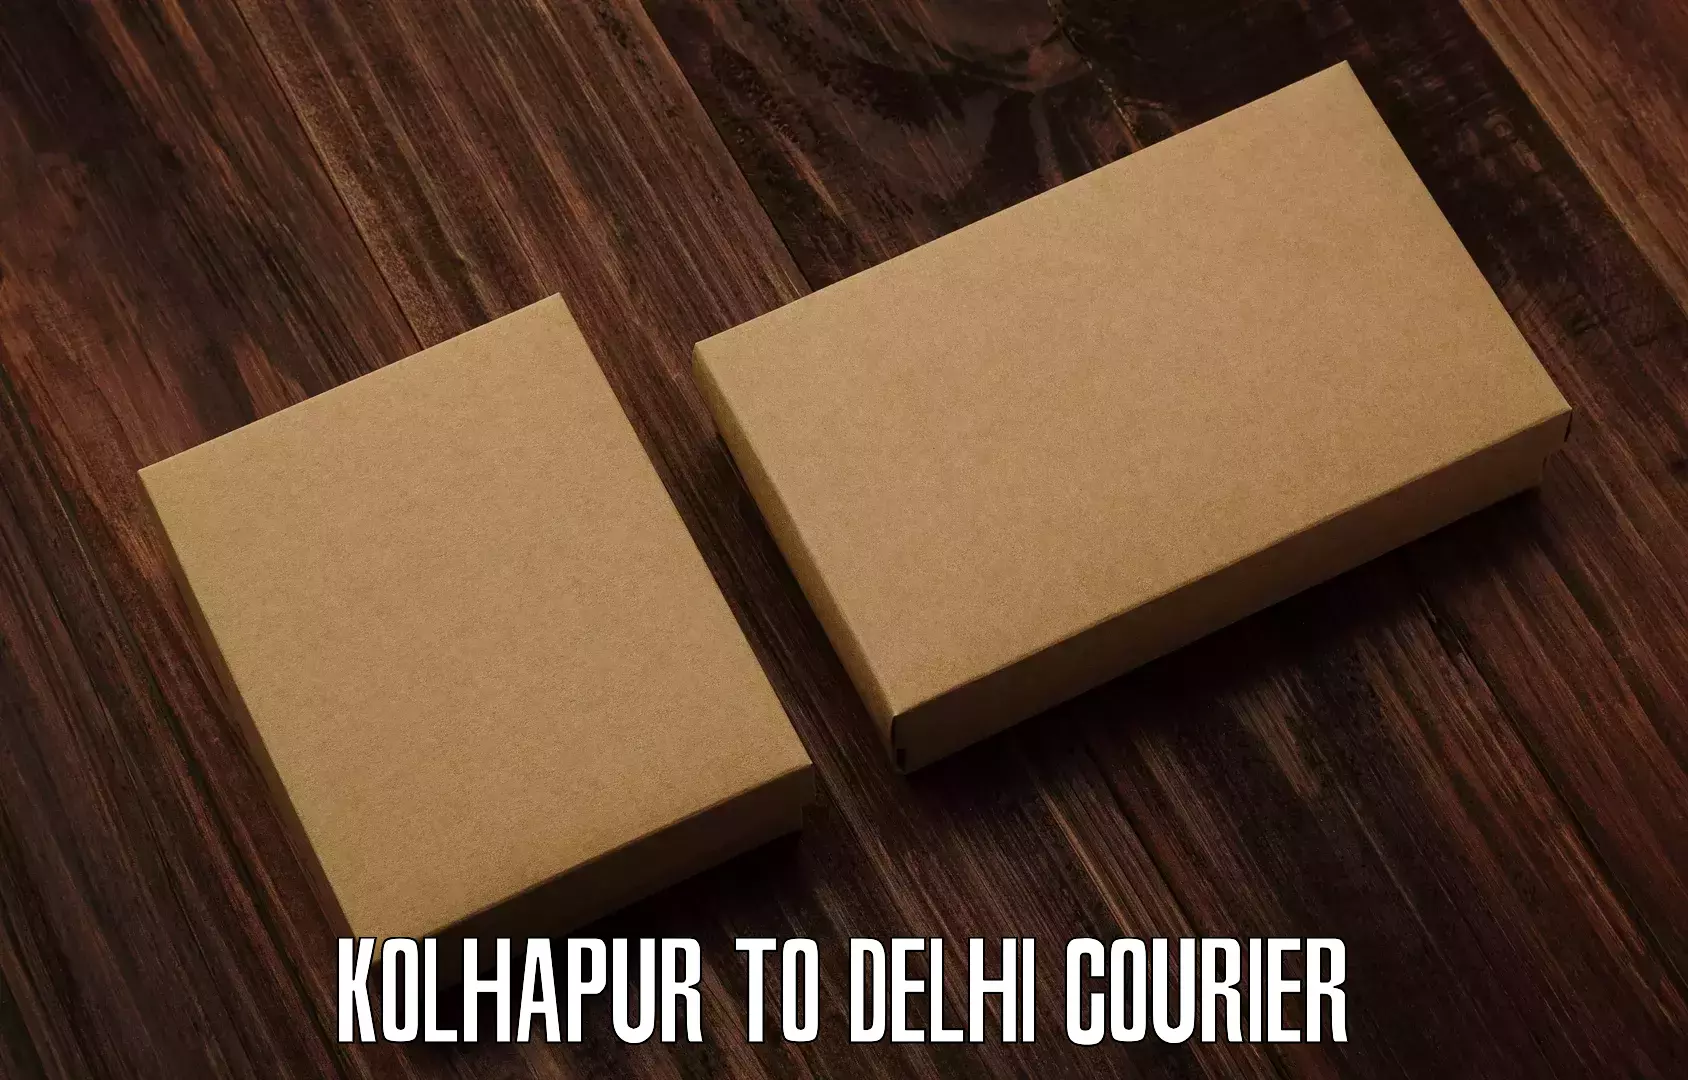 High-speed parcel service Kolhapur to NCR